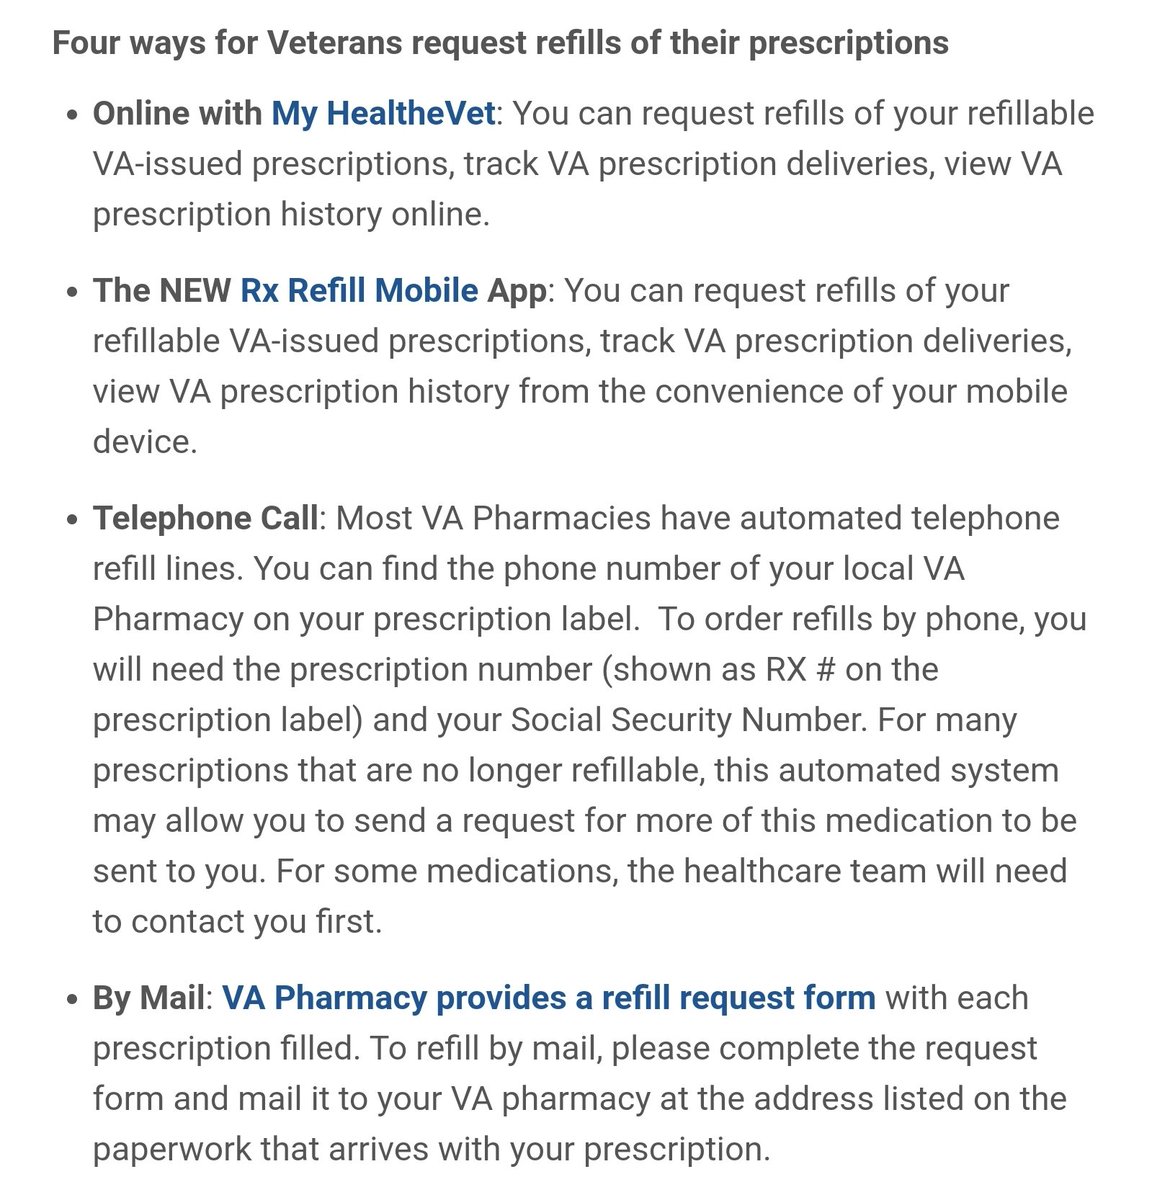 7/ Rx Refills During the Pandemic:The NEW Rx Refill Mobile App: You can request refills of your refillable VA-issued prescriptions, track VA prescription deliveries, view VA prescription history from your mobile device.  https://www.myhealth.va.gov/mhv-portal-web/ss20200401-medication-refills-coronavirus?inheritRedirect=true